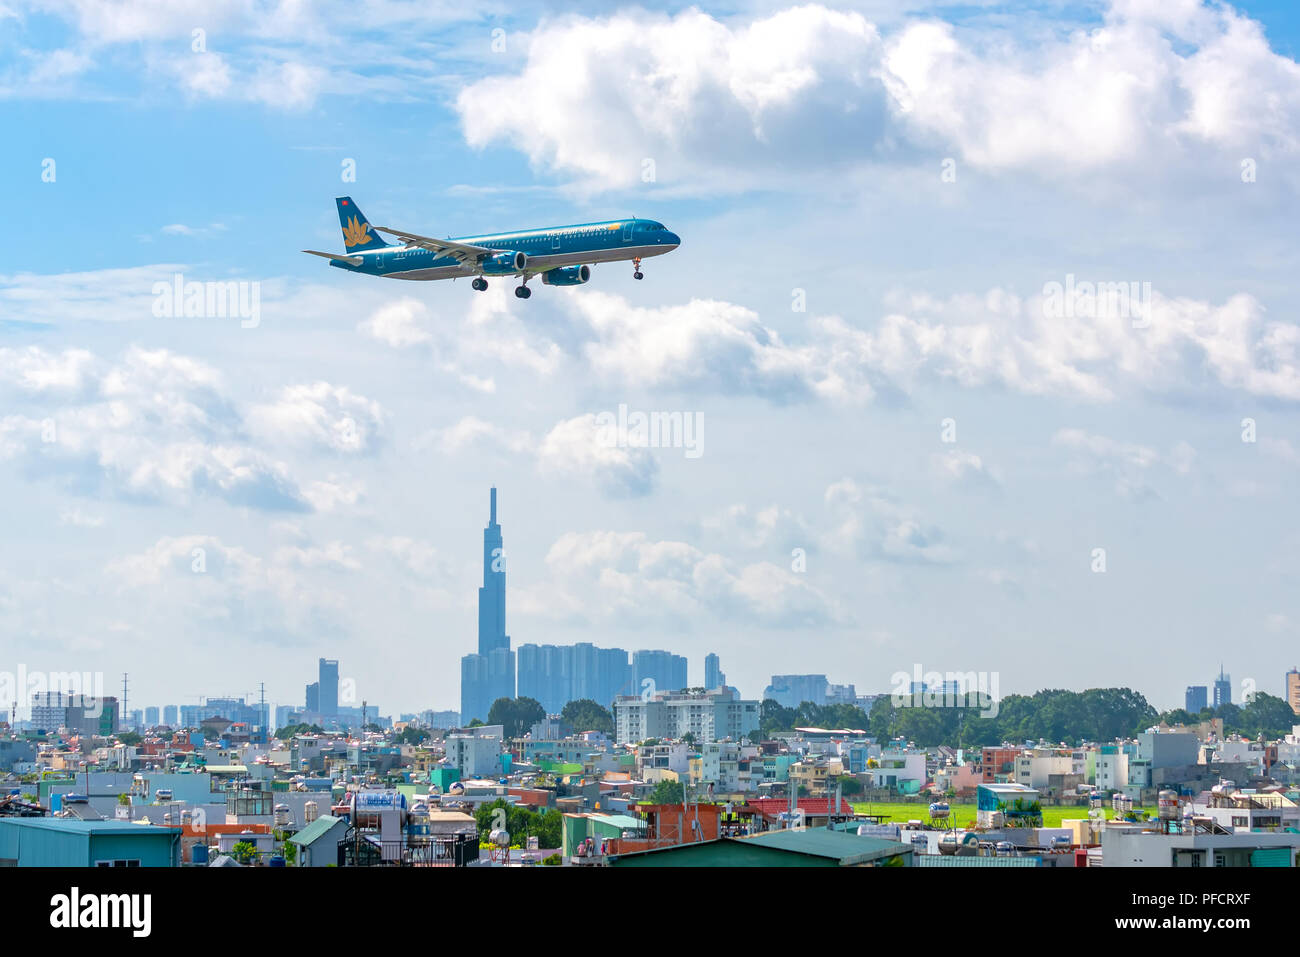 Aibus a321 passenger aircraft of Vietnam airline fly over urban areas preparing to land at Tan Son Nhat International Airport Stock Photo